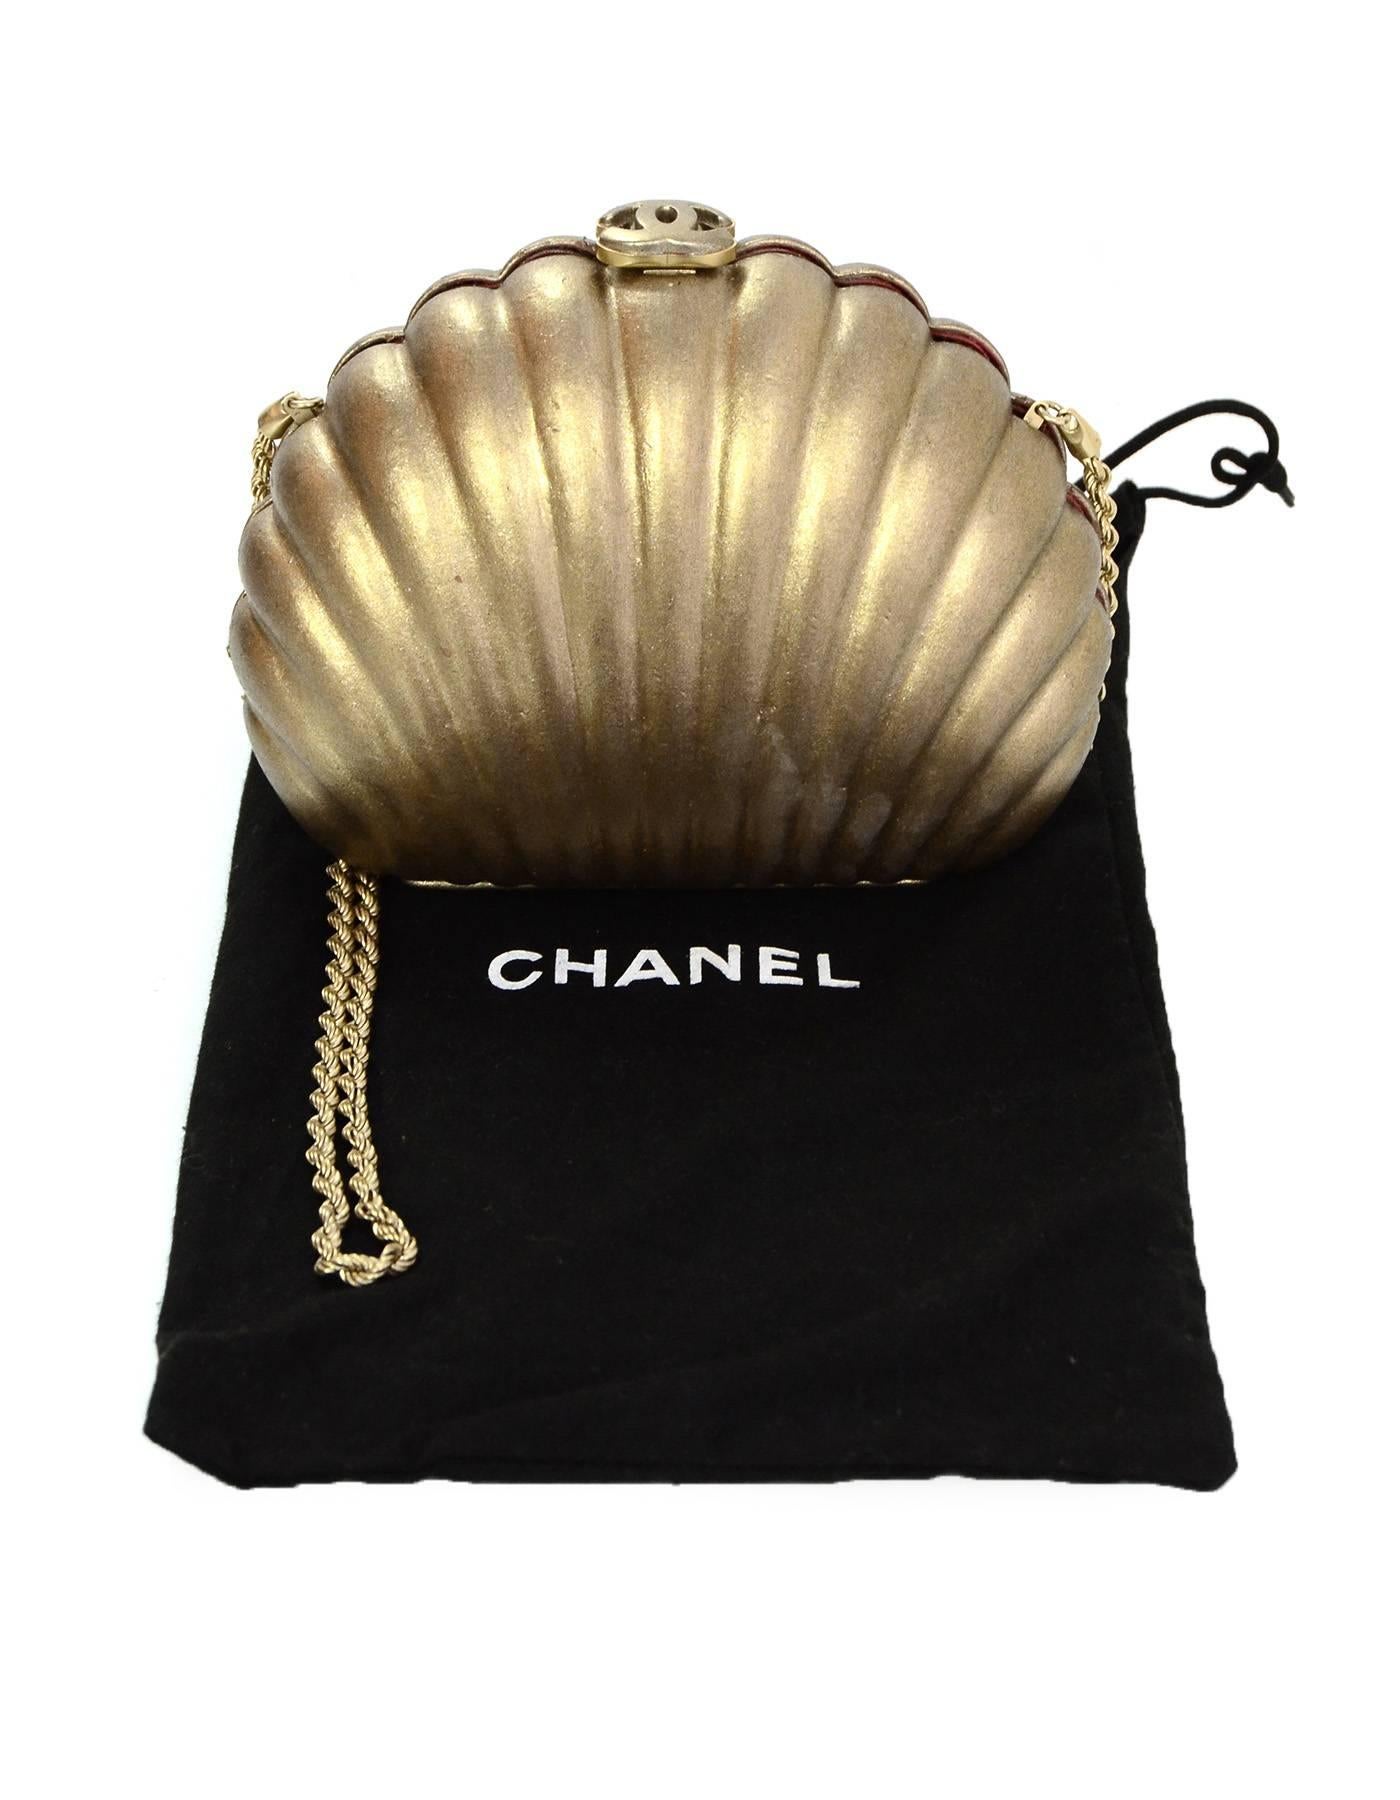 Chanel Gold Leather Seashell Clutch/ Evening Bag 1